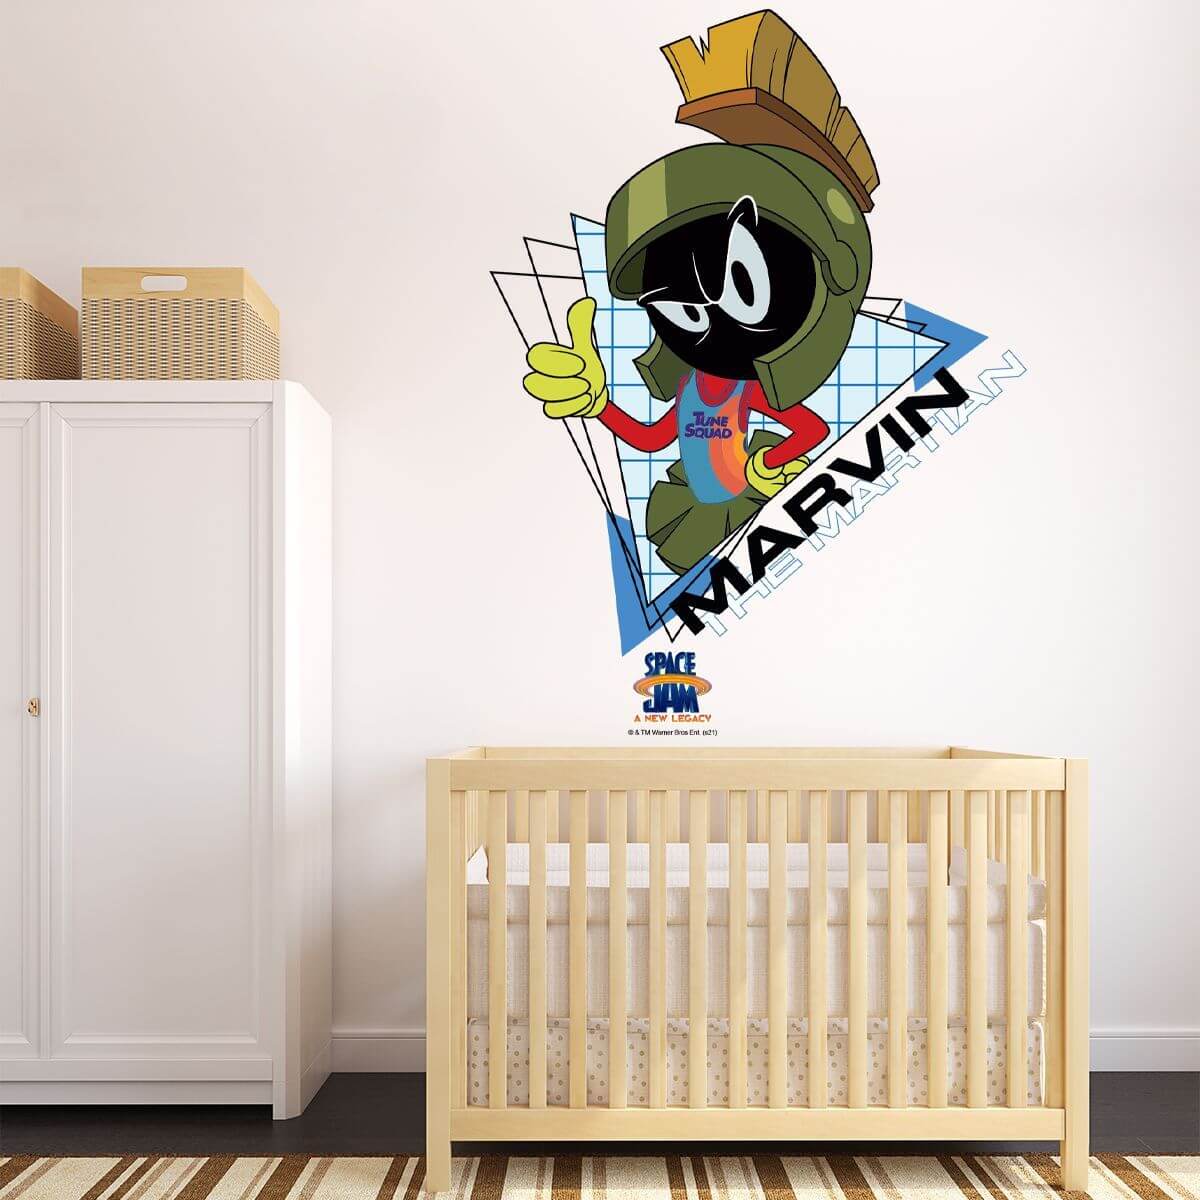 Kismet Decals Space Jam: A New Legacy Marvin the Martian Licensed Wall Sticker - Easy DIY Looney Tunes Home & Room Decor - Kismet Decals